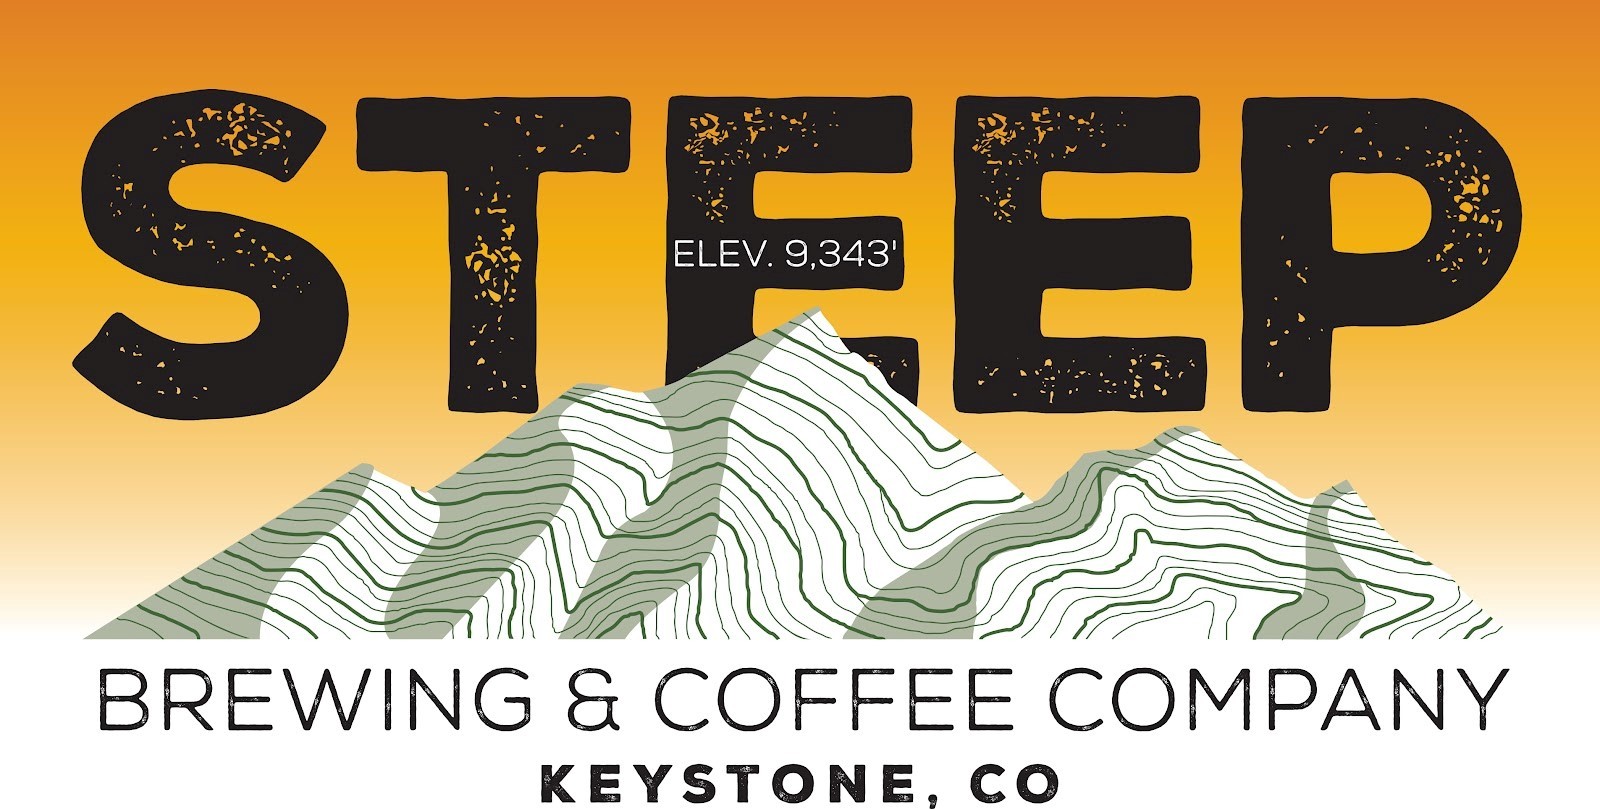 Steep brewing and coffee company